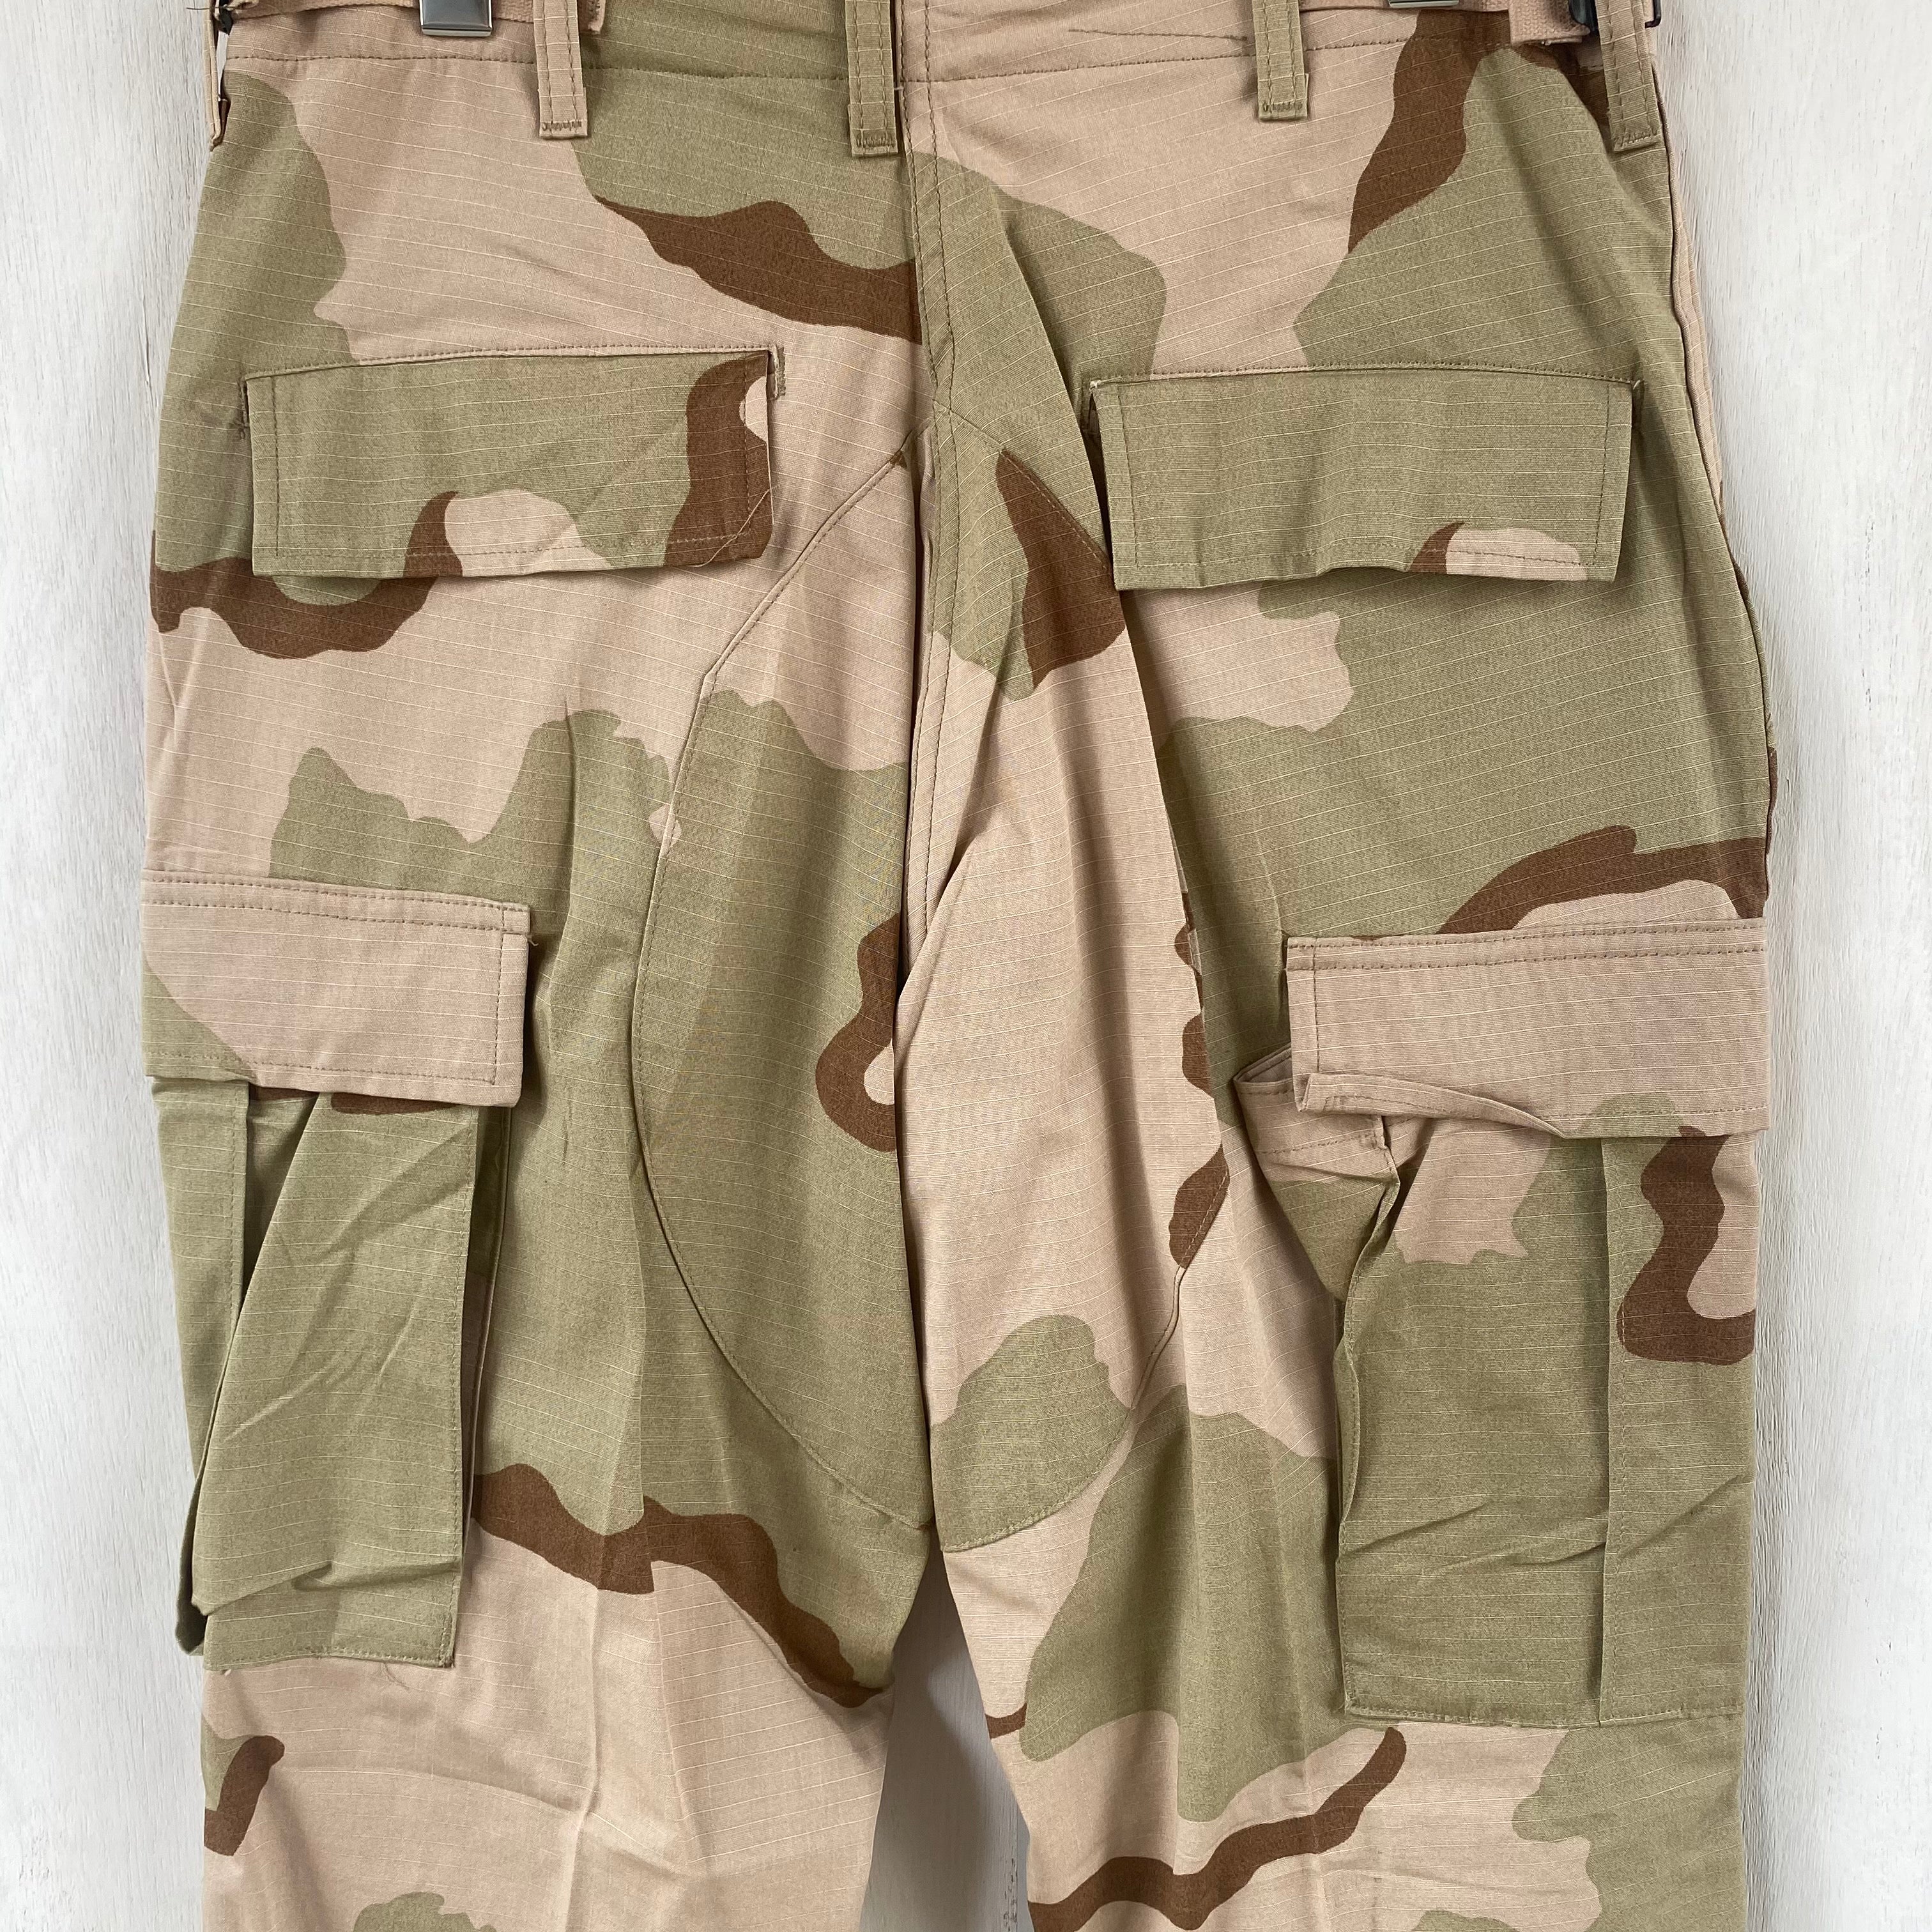 [ ONLY ONE ! ] U.S. 3COLOR BDU PANTS / U.S. MILITARY